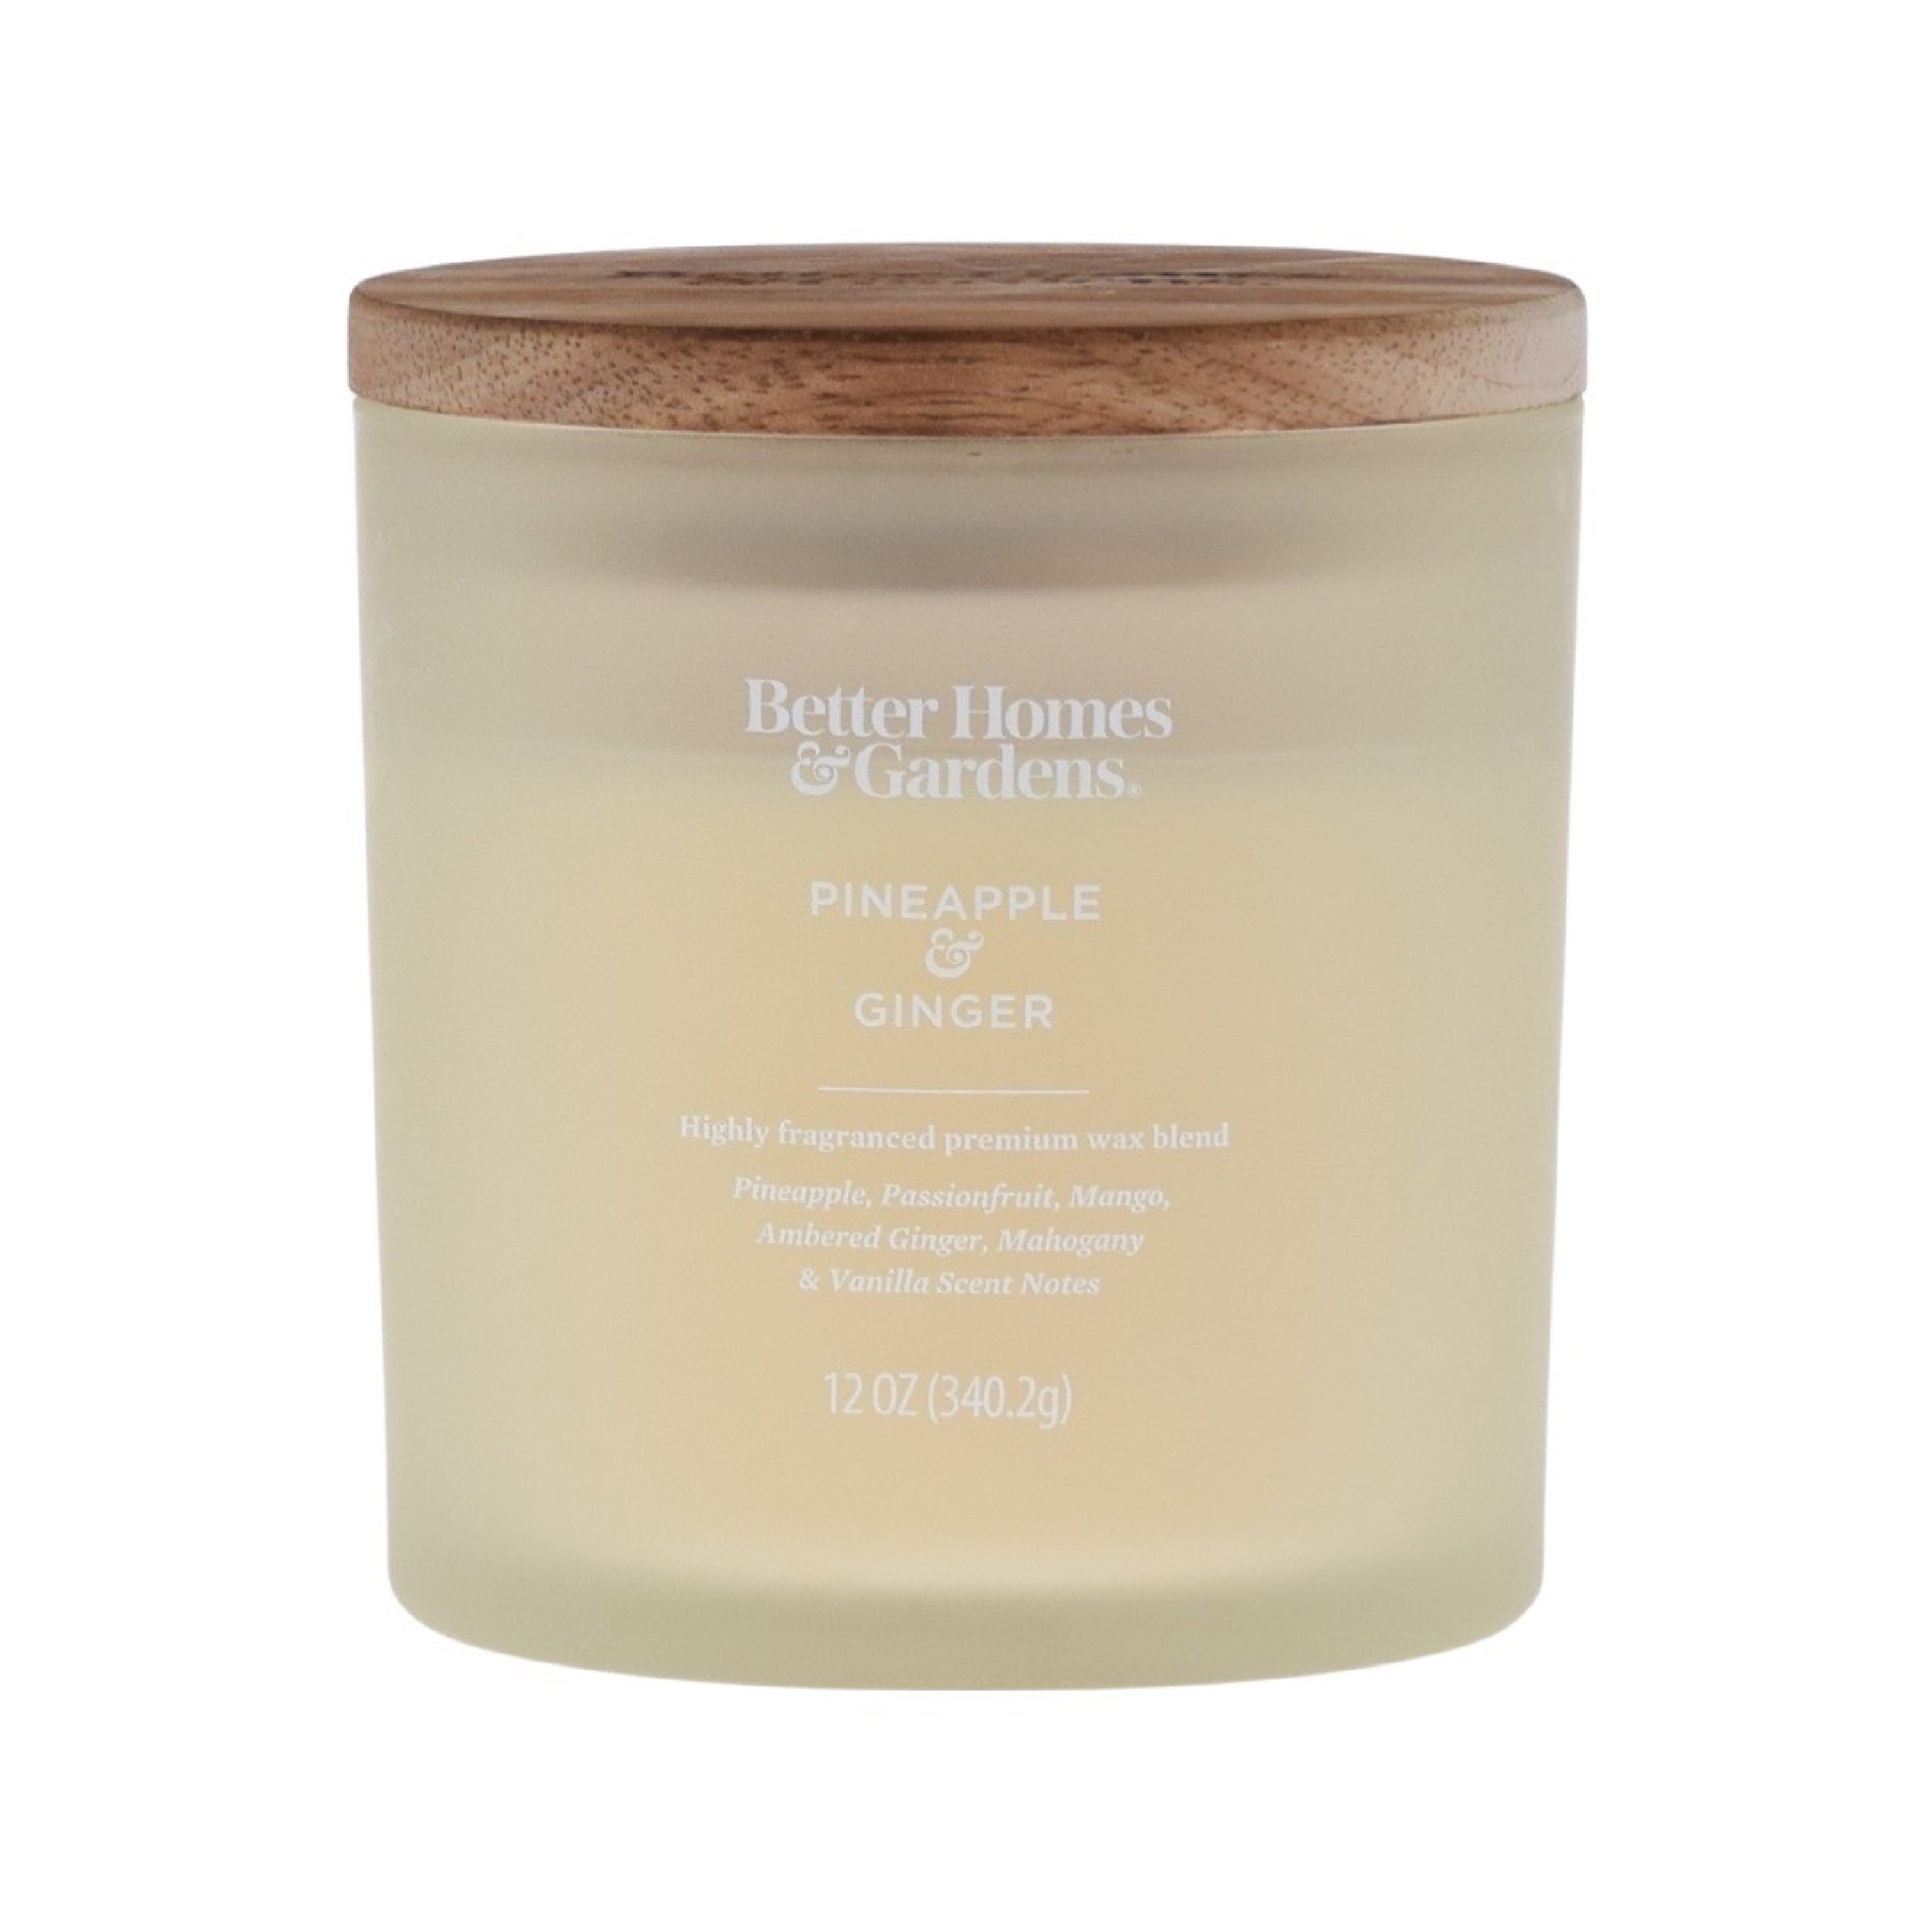 Better Homes & Gardens 12oz White Peach & Daisy Scented 2-wick Jar Candle